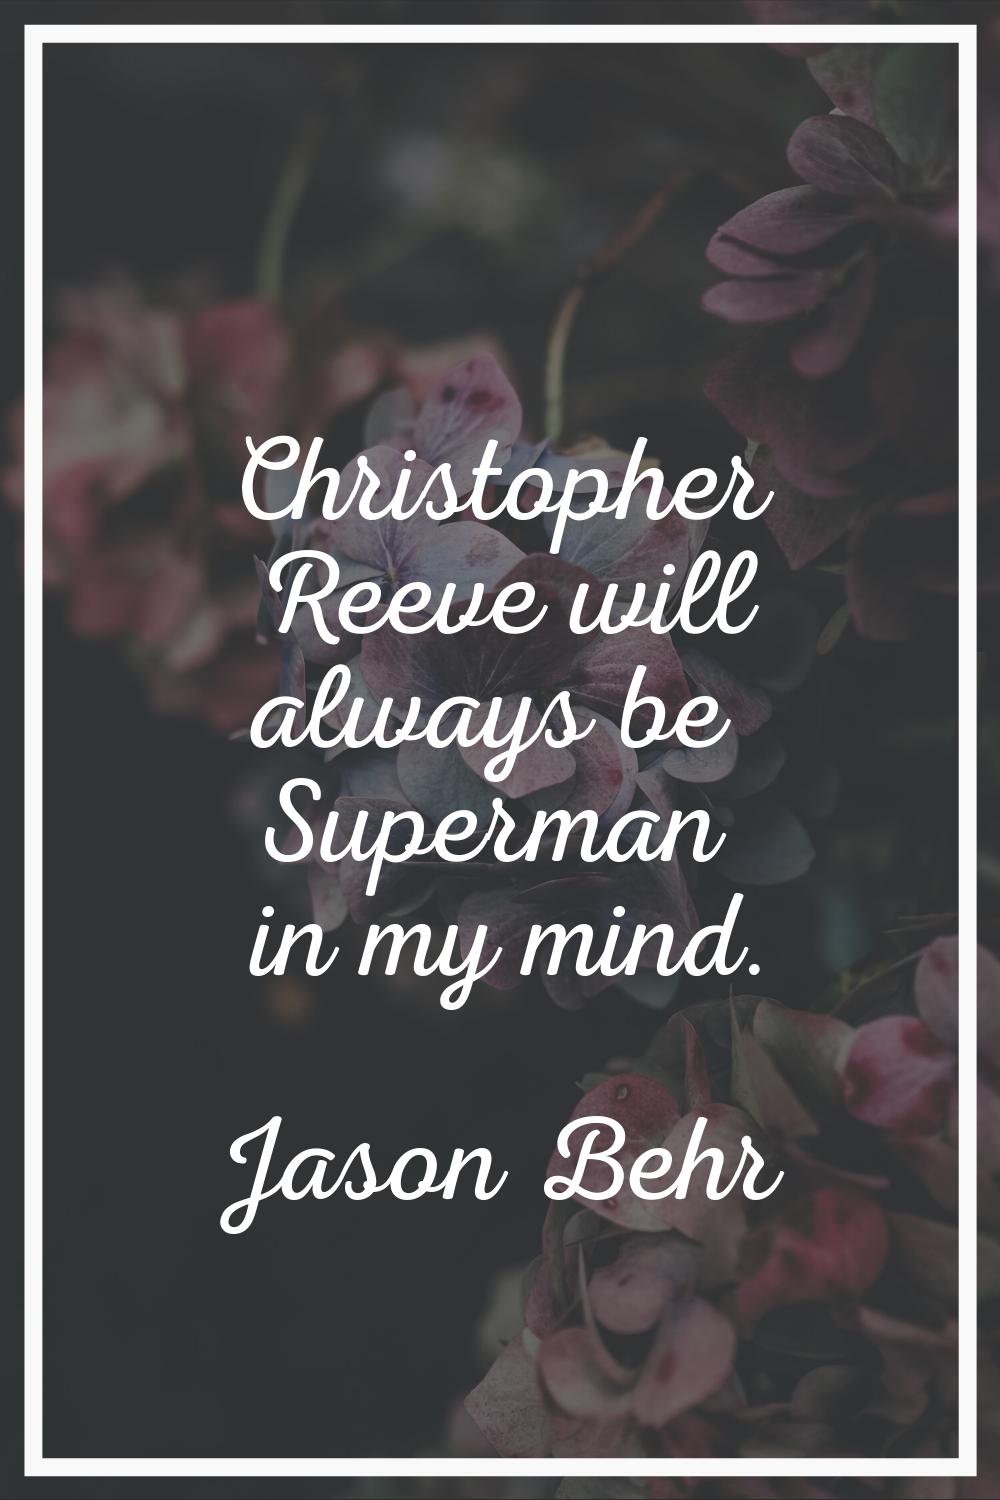 Christopher Reeve will always be Superman in my mind.